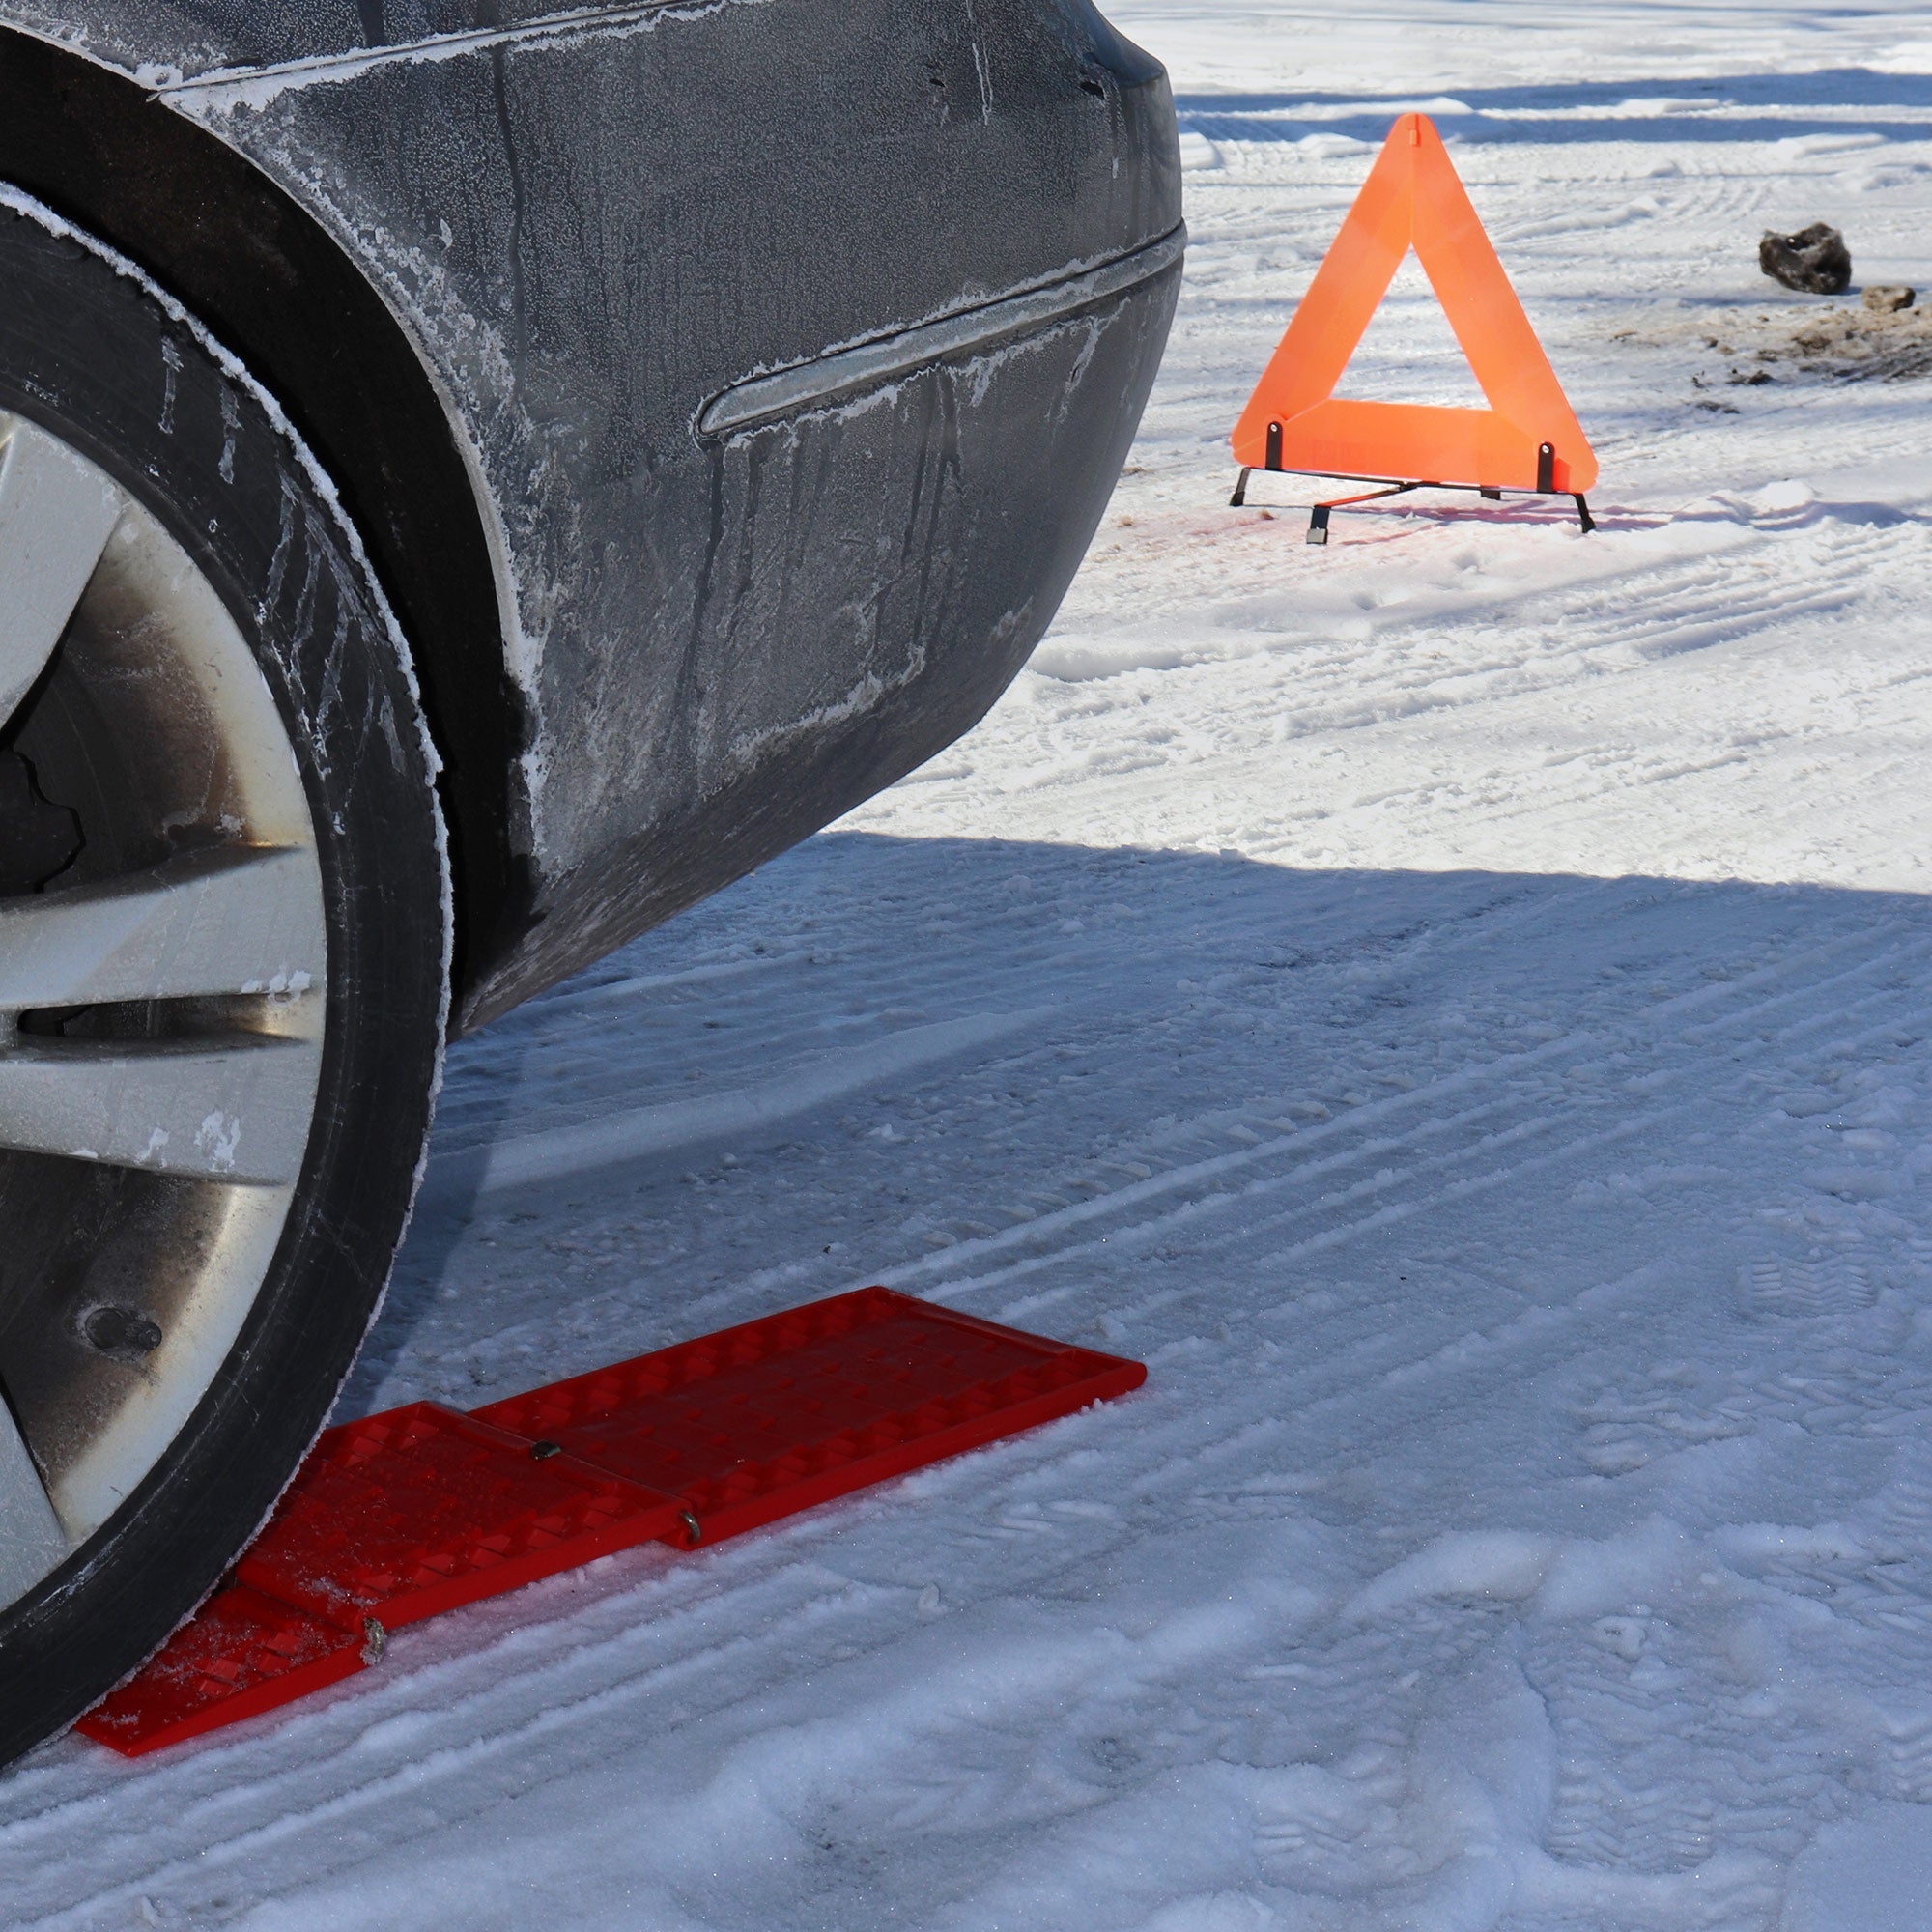 Lifestyle image shows a closeup view of the rear of a gray car on snow-covered ground with a traction strip under the tire and the warning triangle visible in the background